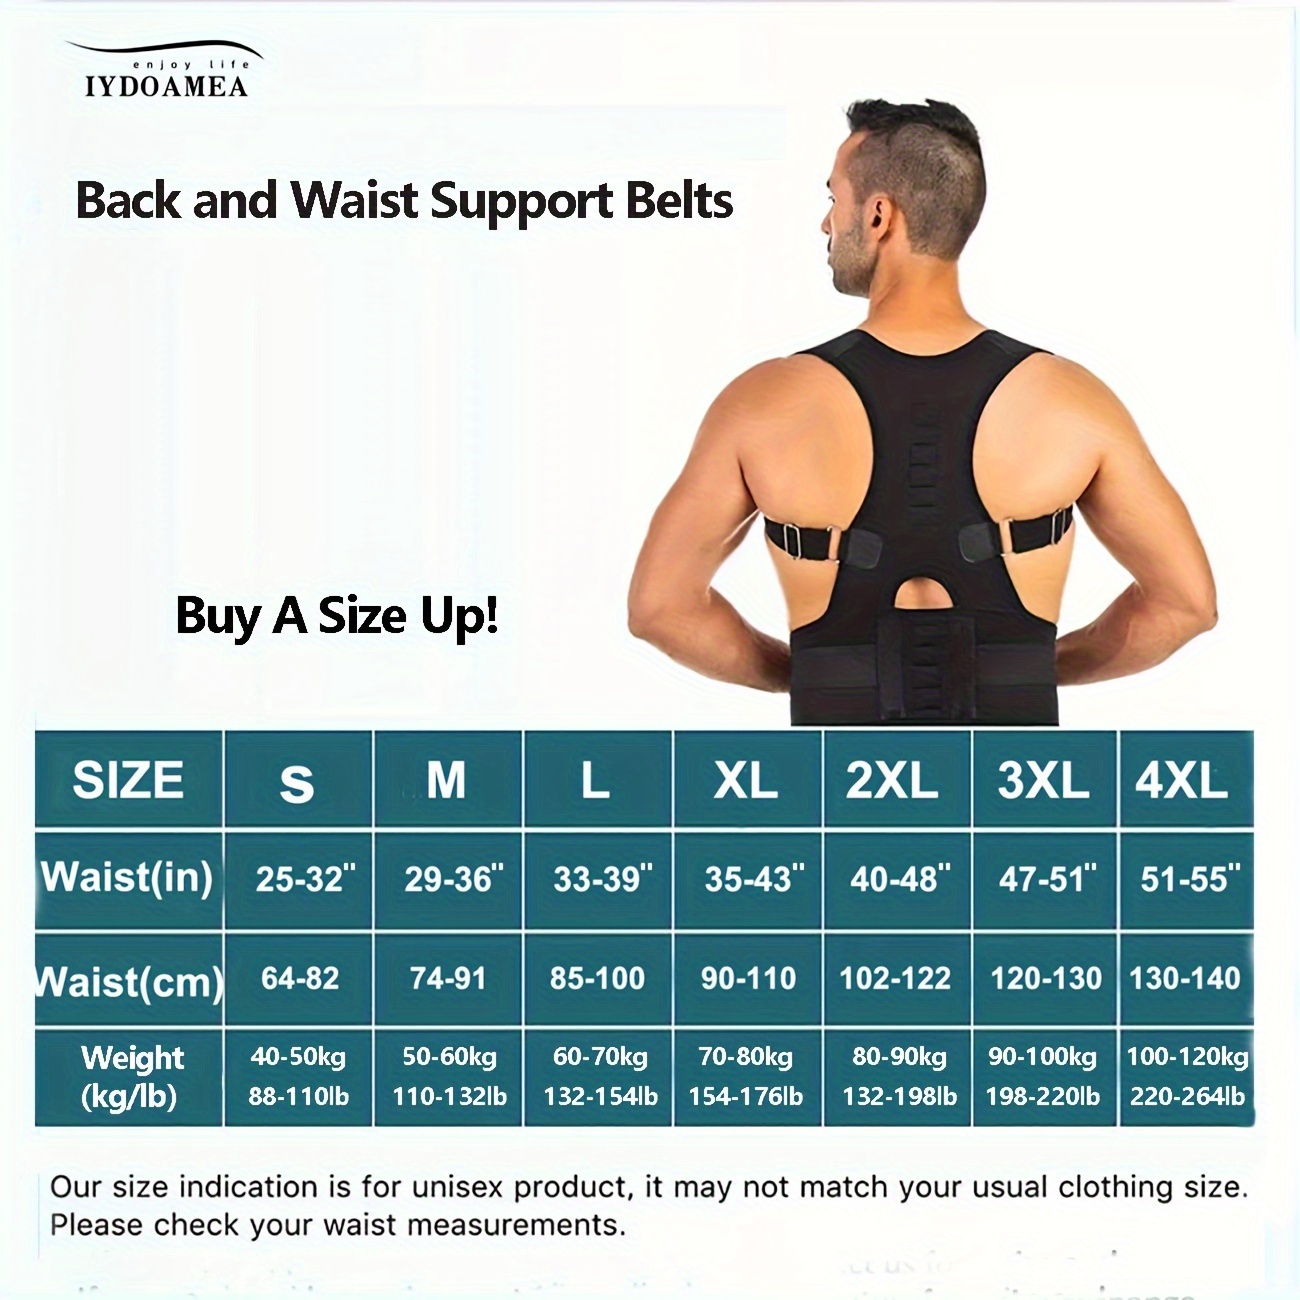 Back and Waist Support Products